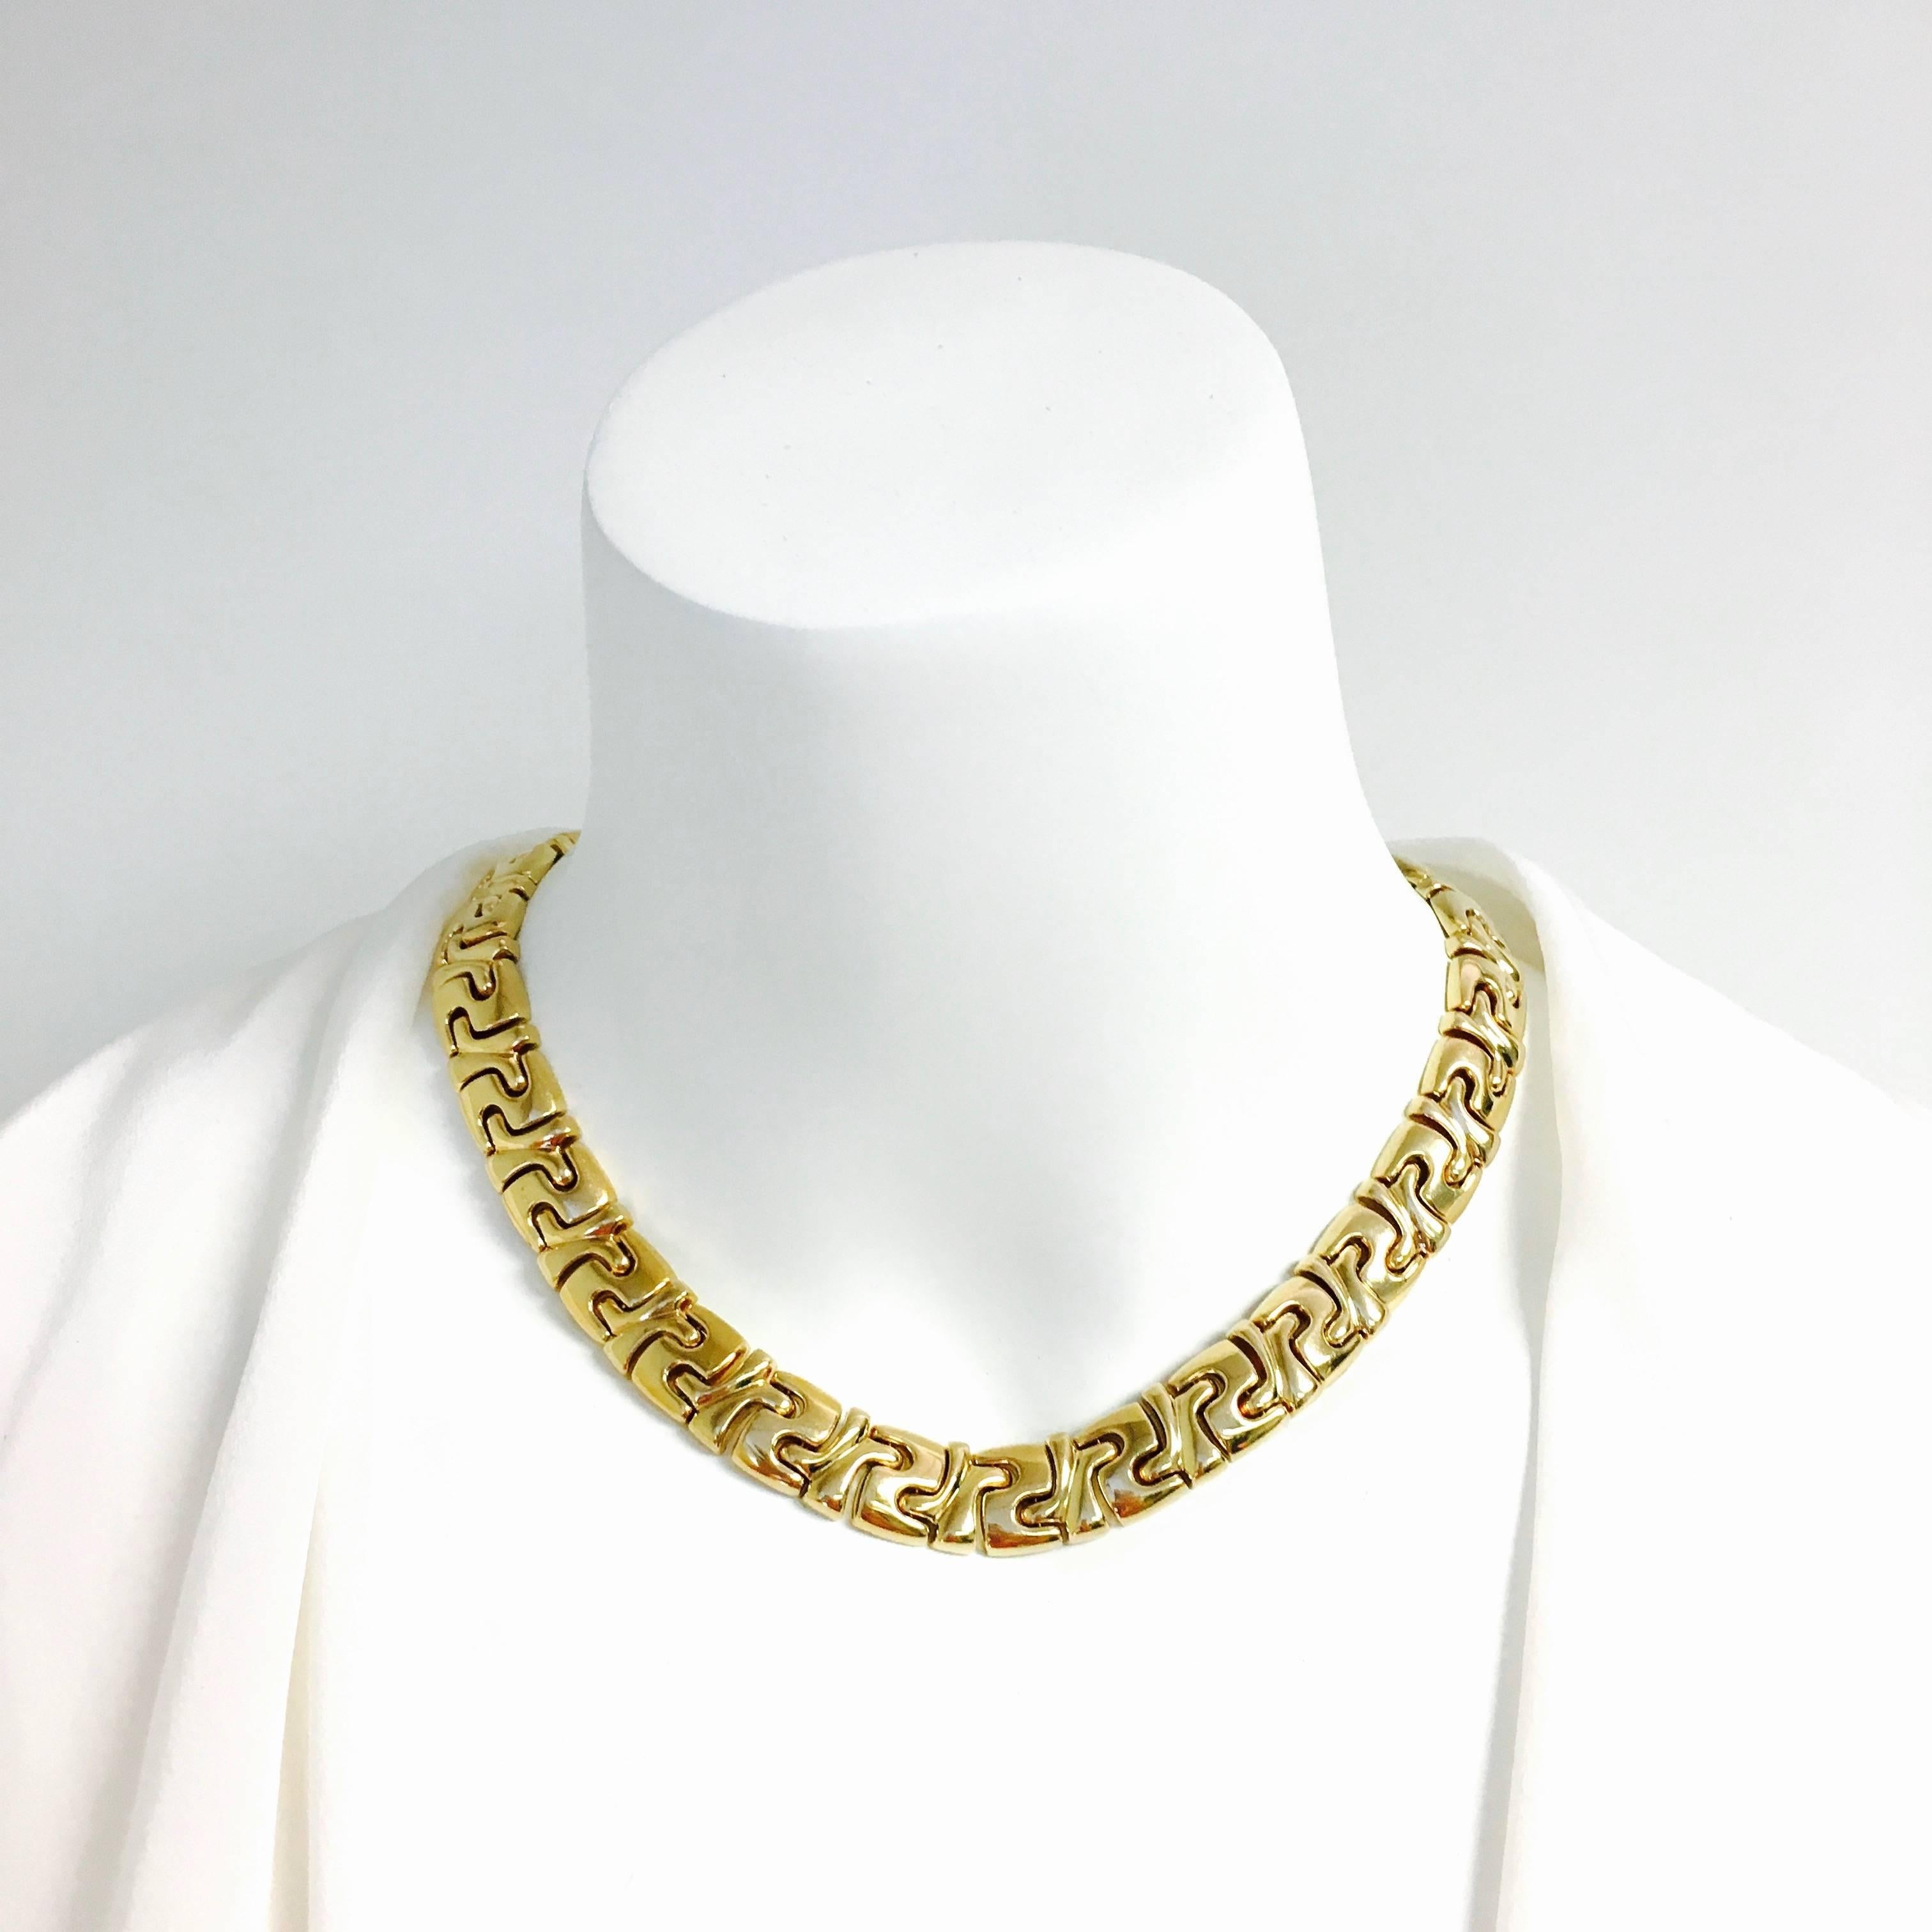 14K yellow gold collar necklace, approximately 1/2